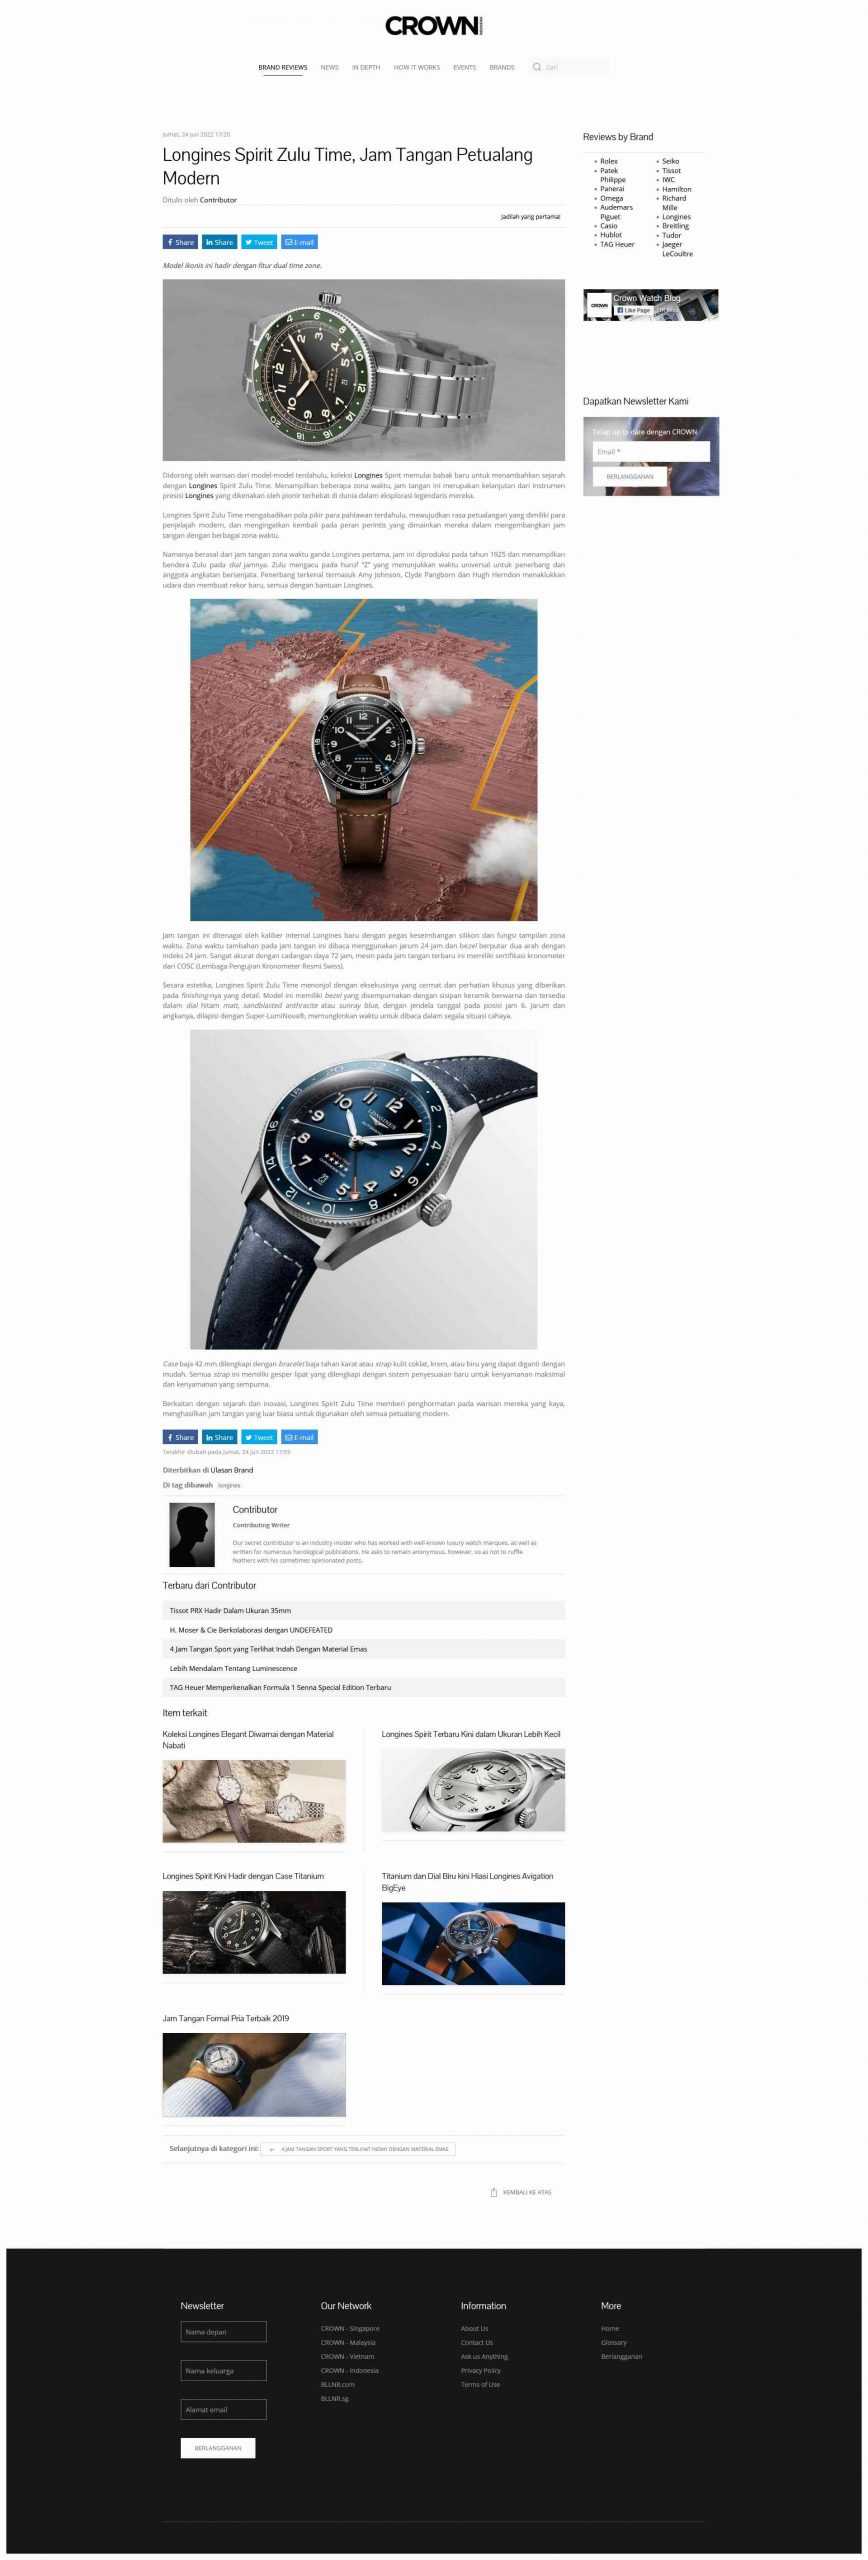 220624_crownwatch_optimized.id_longines_1pg_